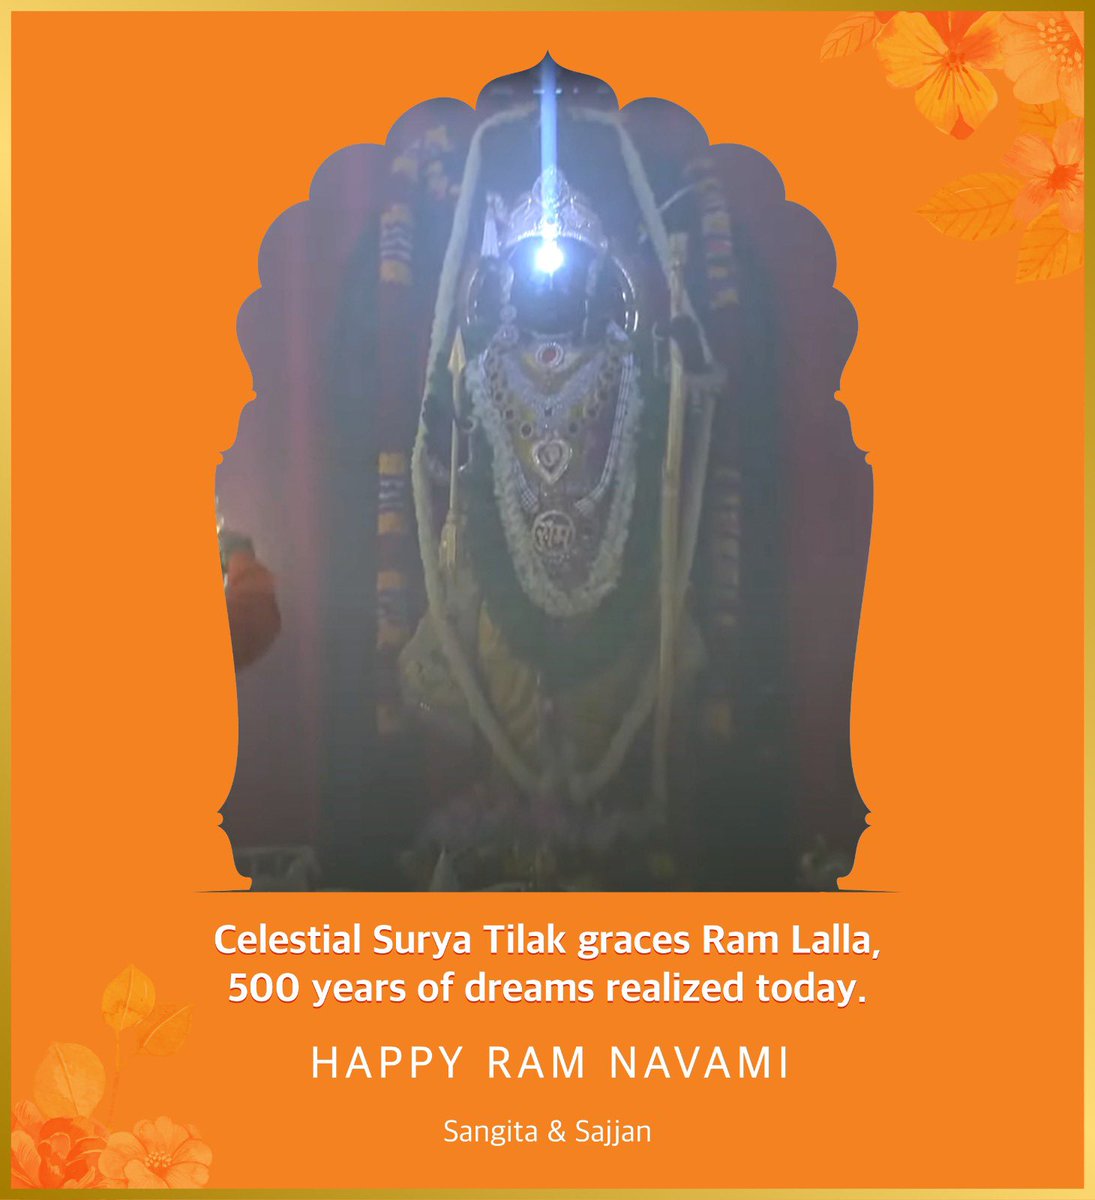 This year’s #RamNavami is special as Ram Lalla is home after 5 centuries! The energy and the atmosphere in #Ayodhya is unlike anything ever experienced as for the first time we also witness “Surya Tilak” on Ram Lalla’s forehead. Wishing all on this auspicious day. #JaiShreeRam